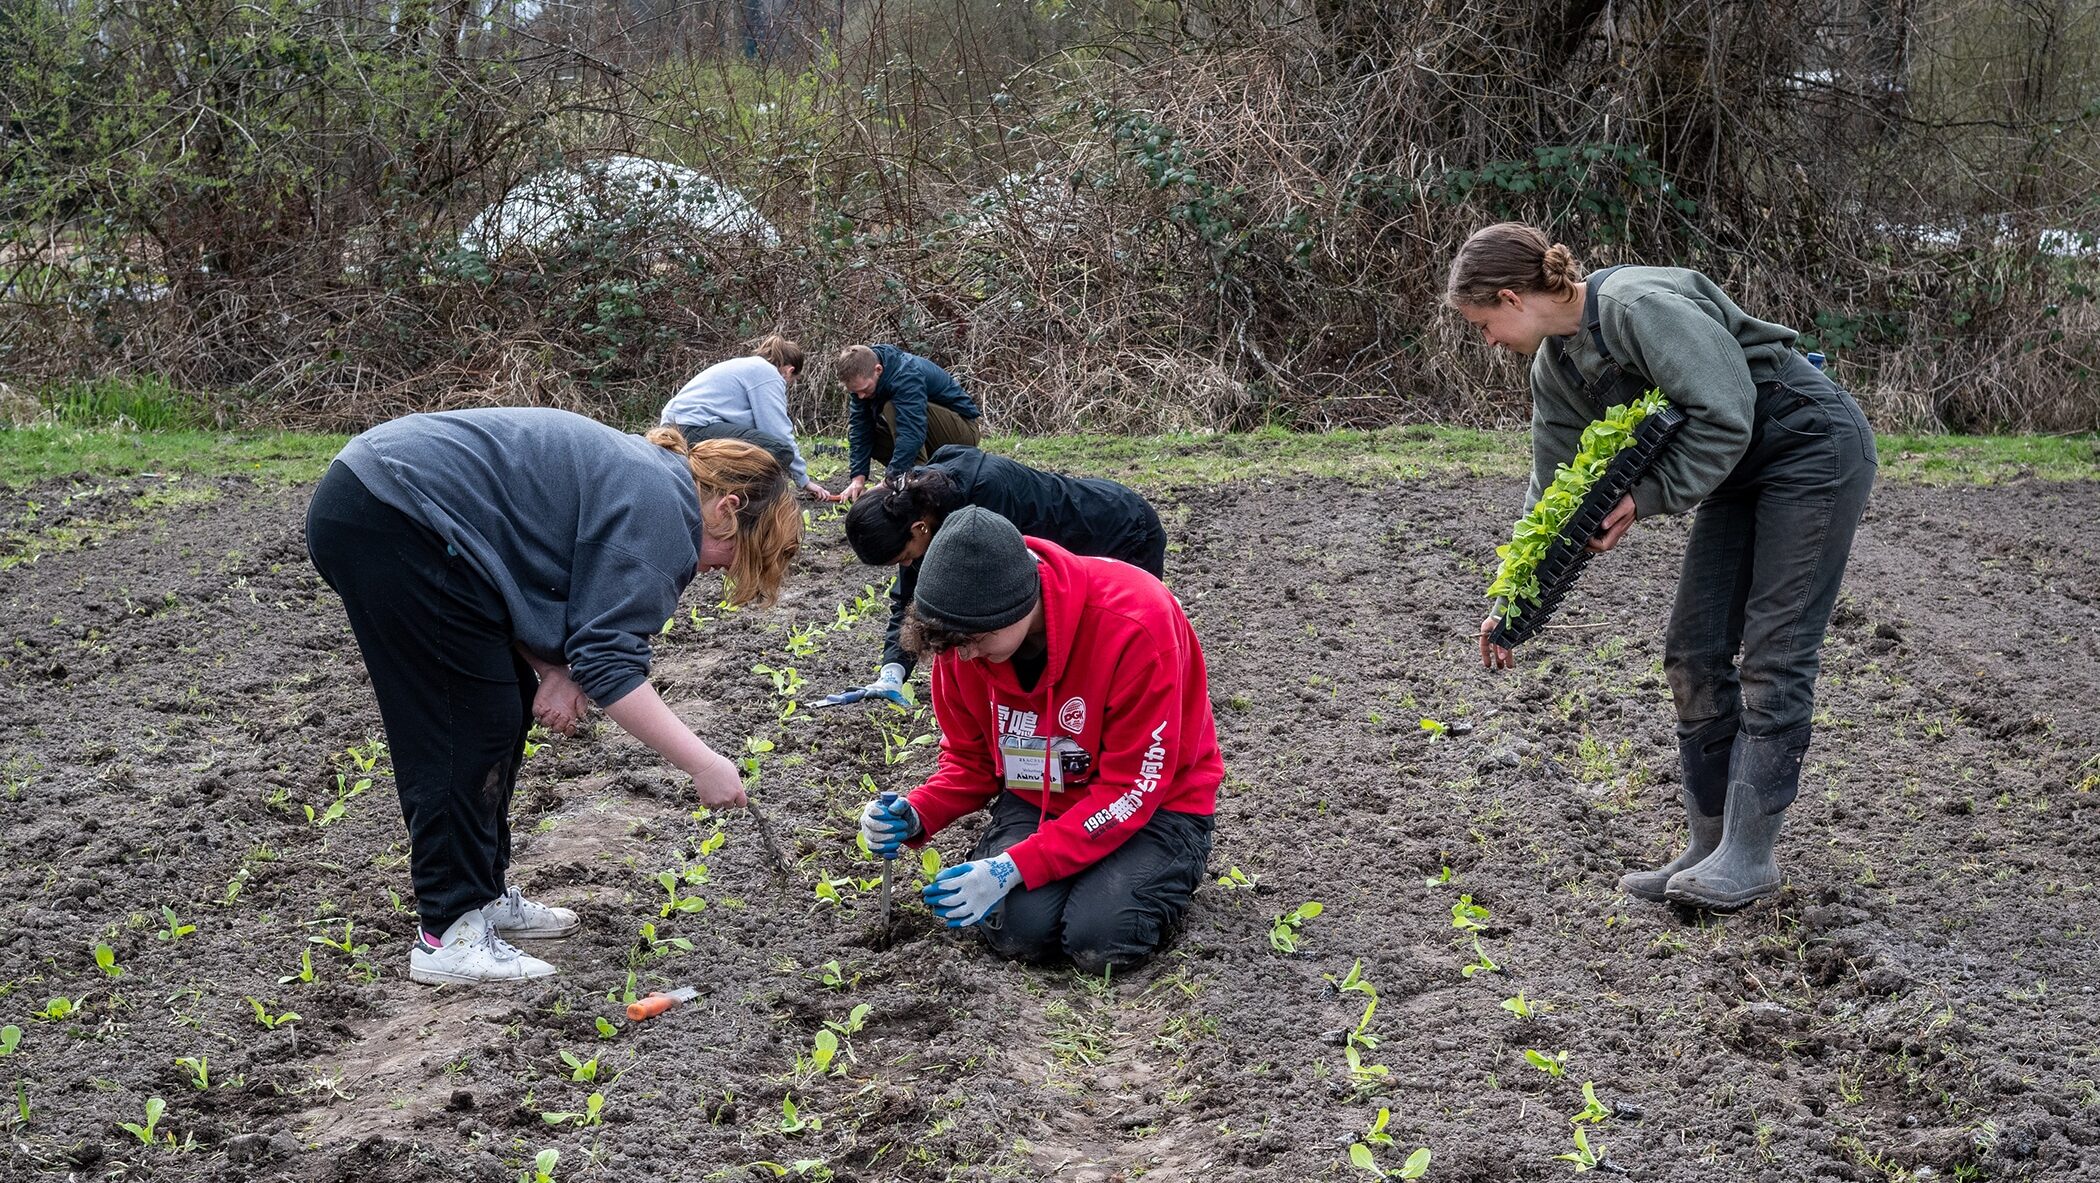 Volunteers plant vegetable starts in a field on the 21 Acres Farm.